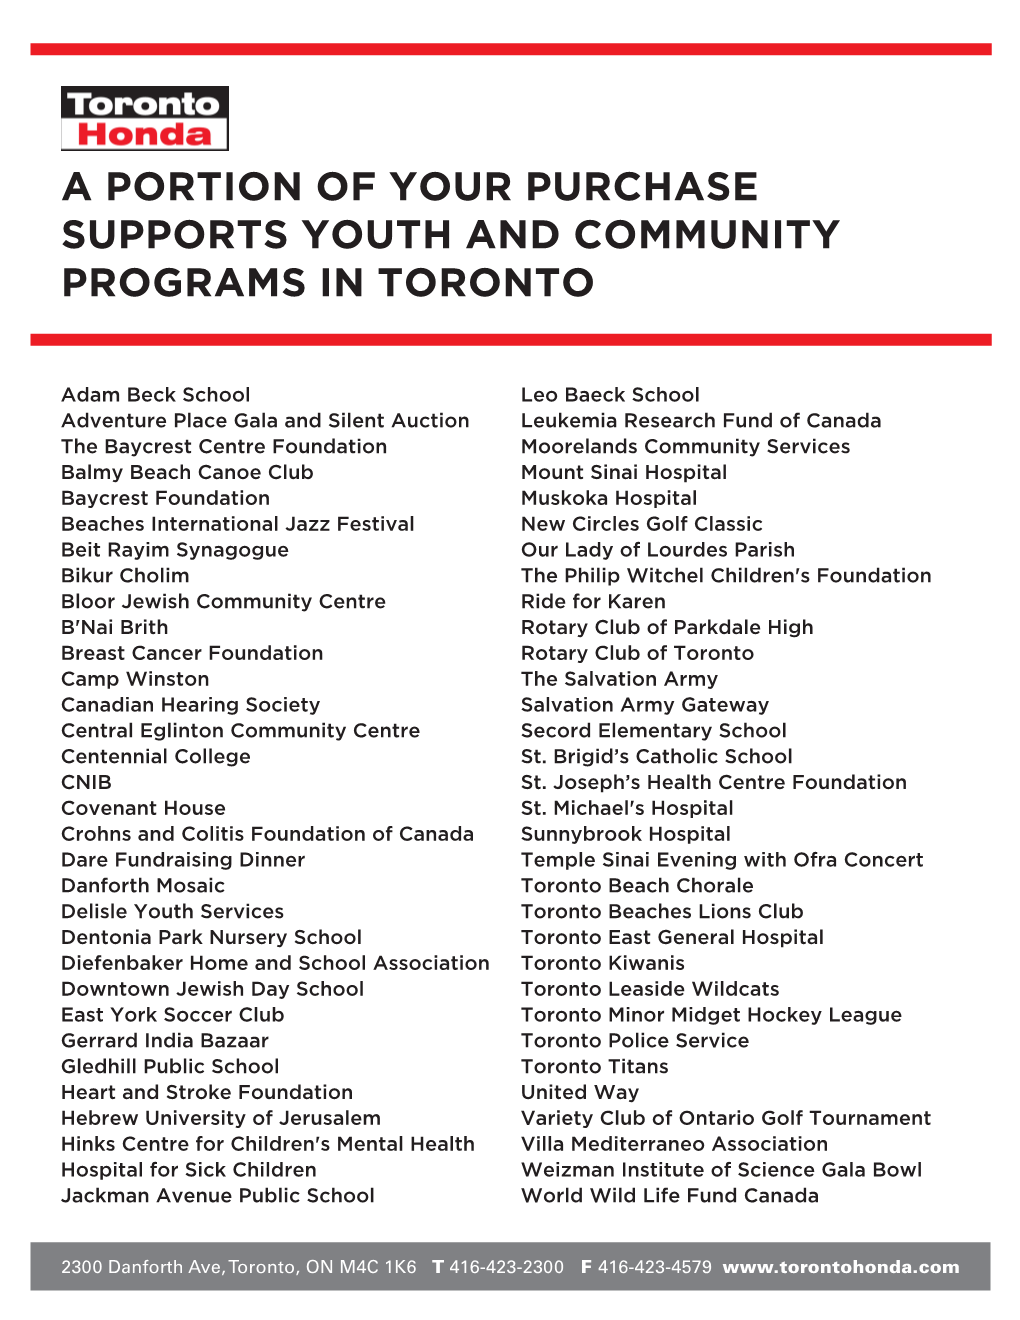 A Portion of Your Purchase Supports Youth and Community Programs in Toronto